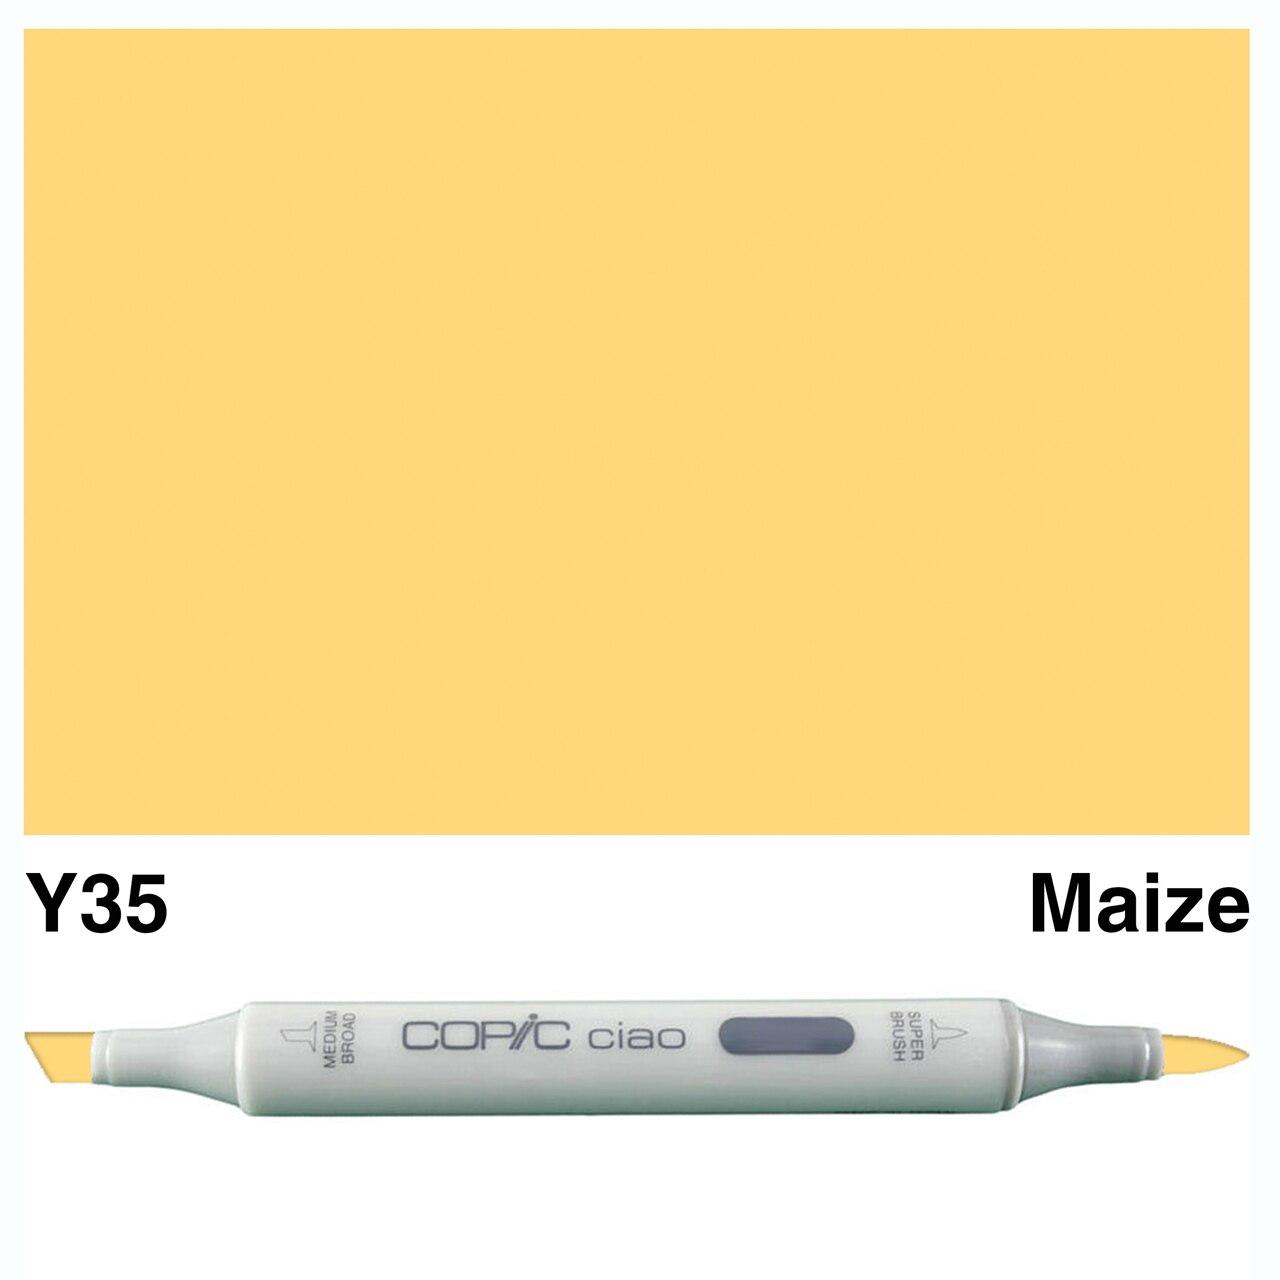 Copic - Ciao Marker - Maize - Y35-ScrapbookPal